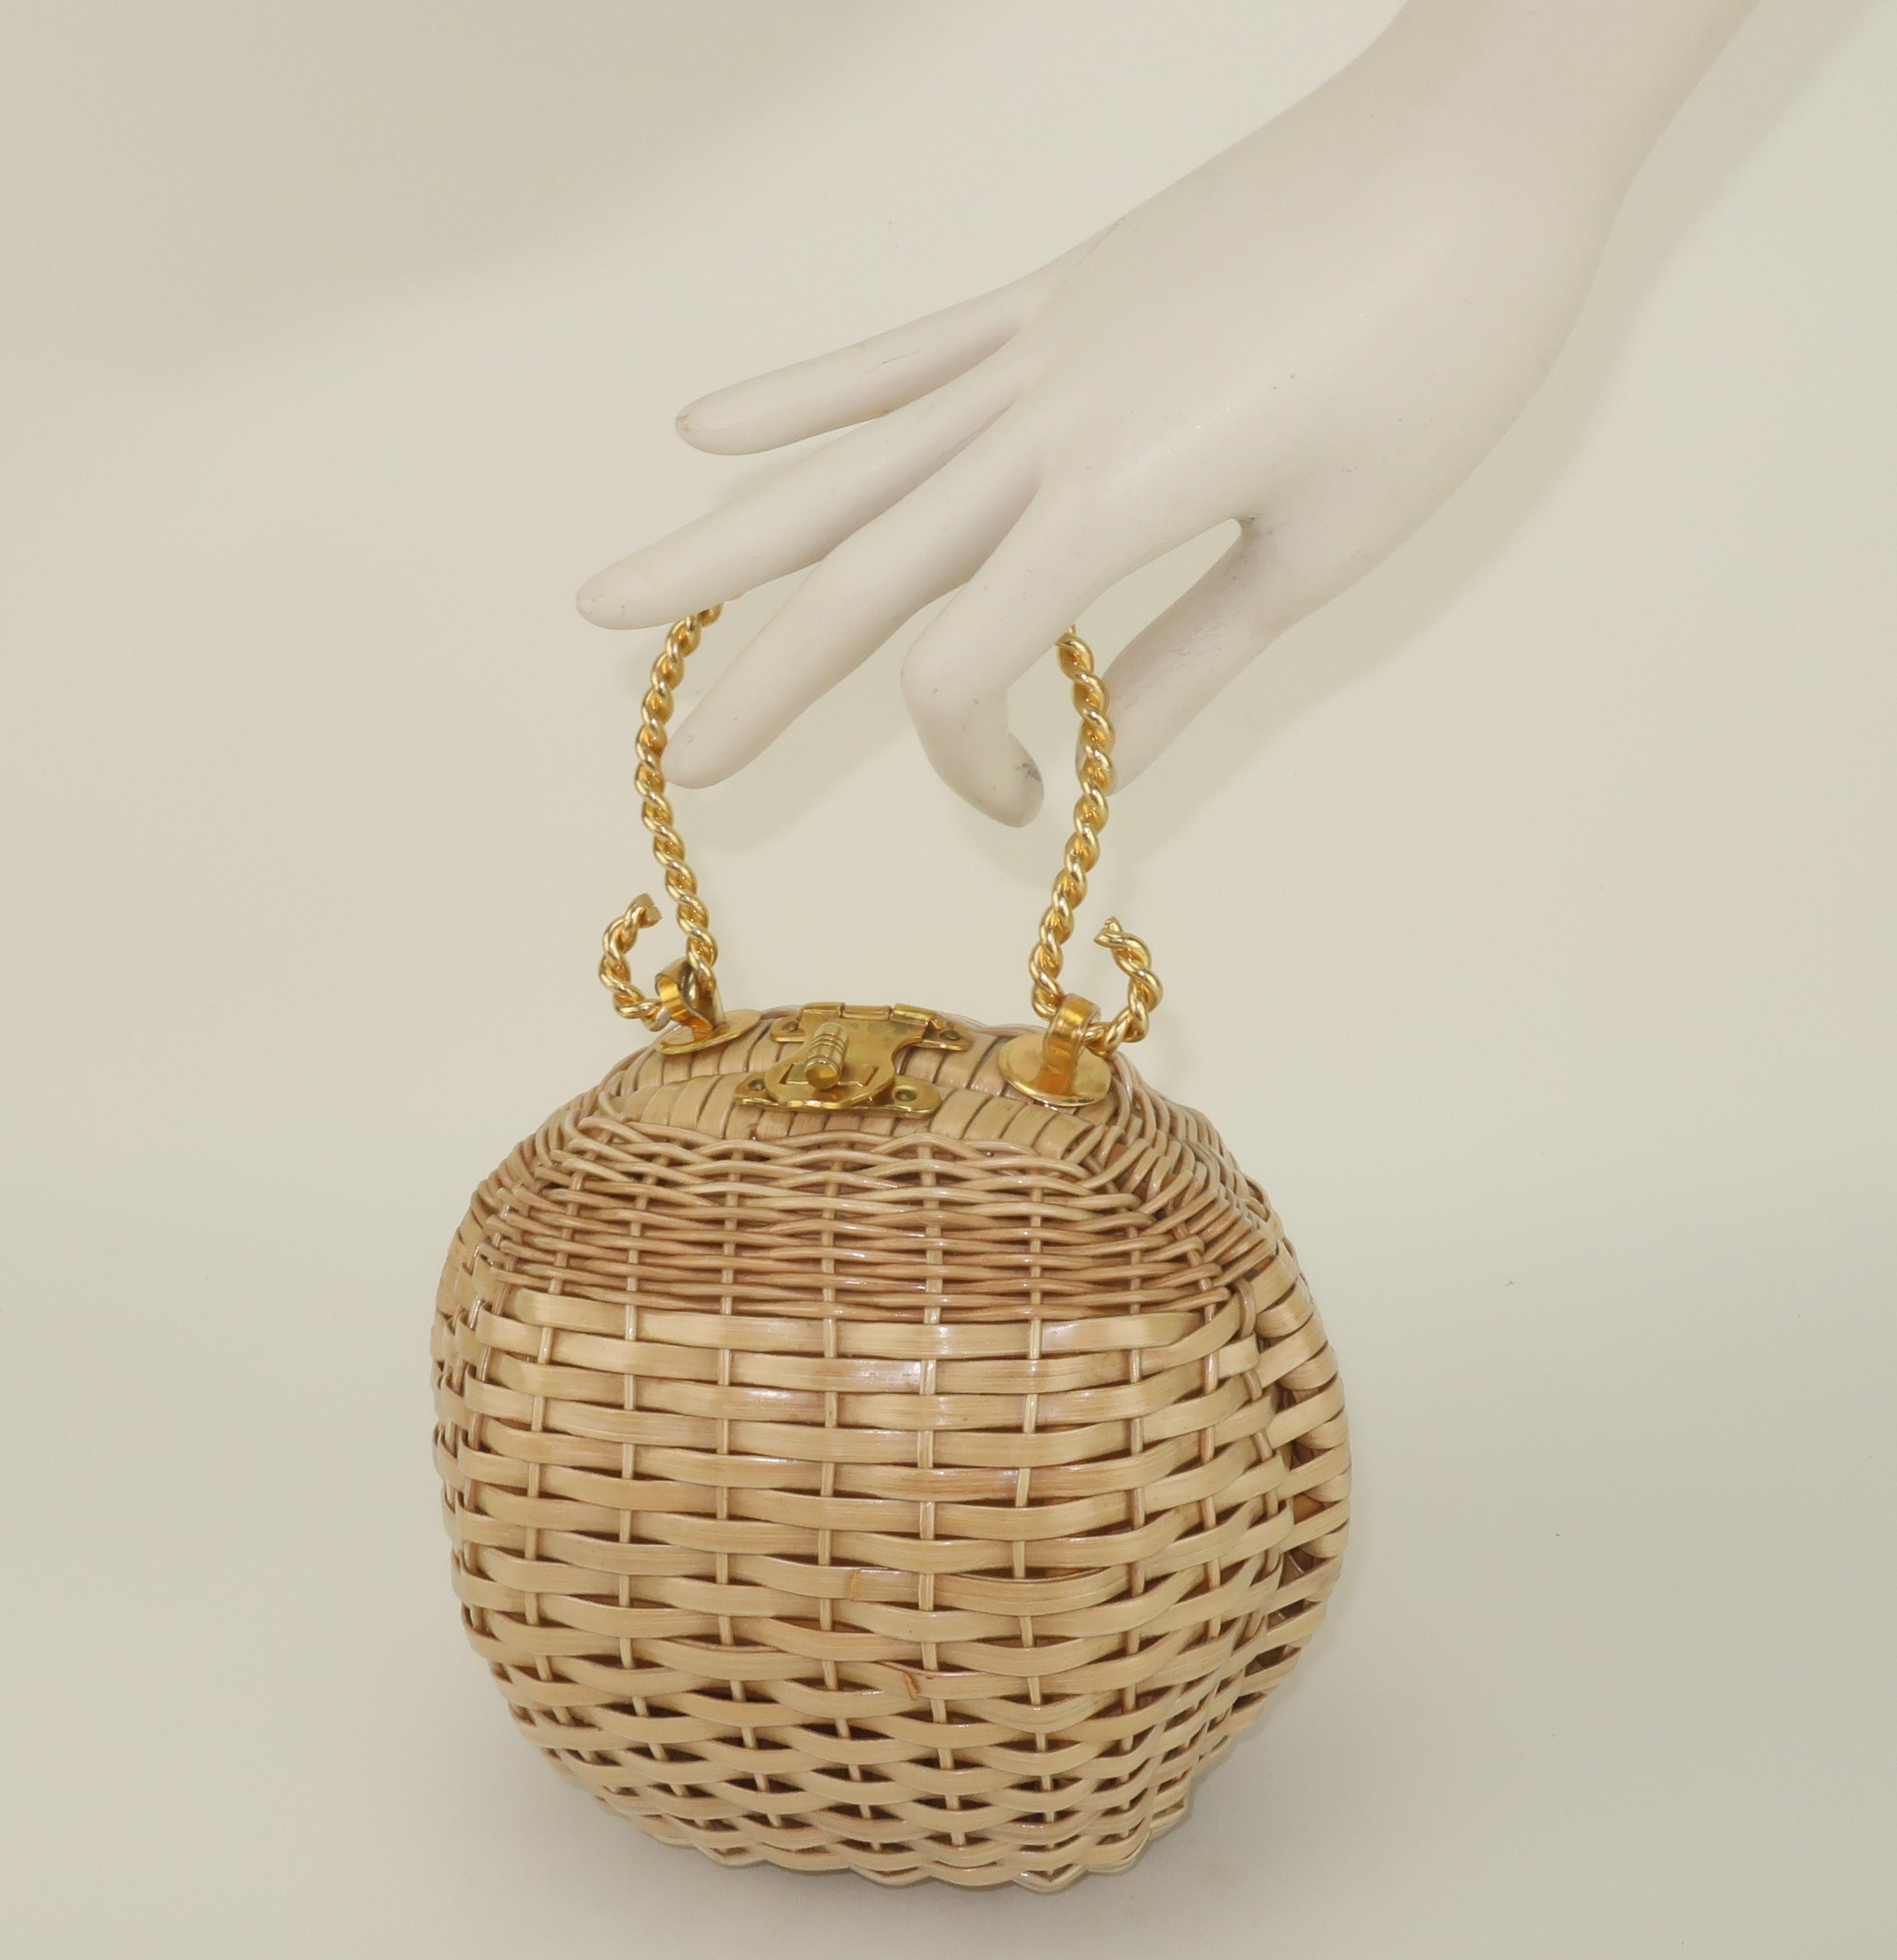 Wicker Ball Shaped Handbag With Gold Handle, 1960's For Sale 5